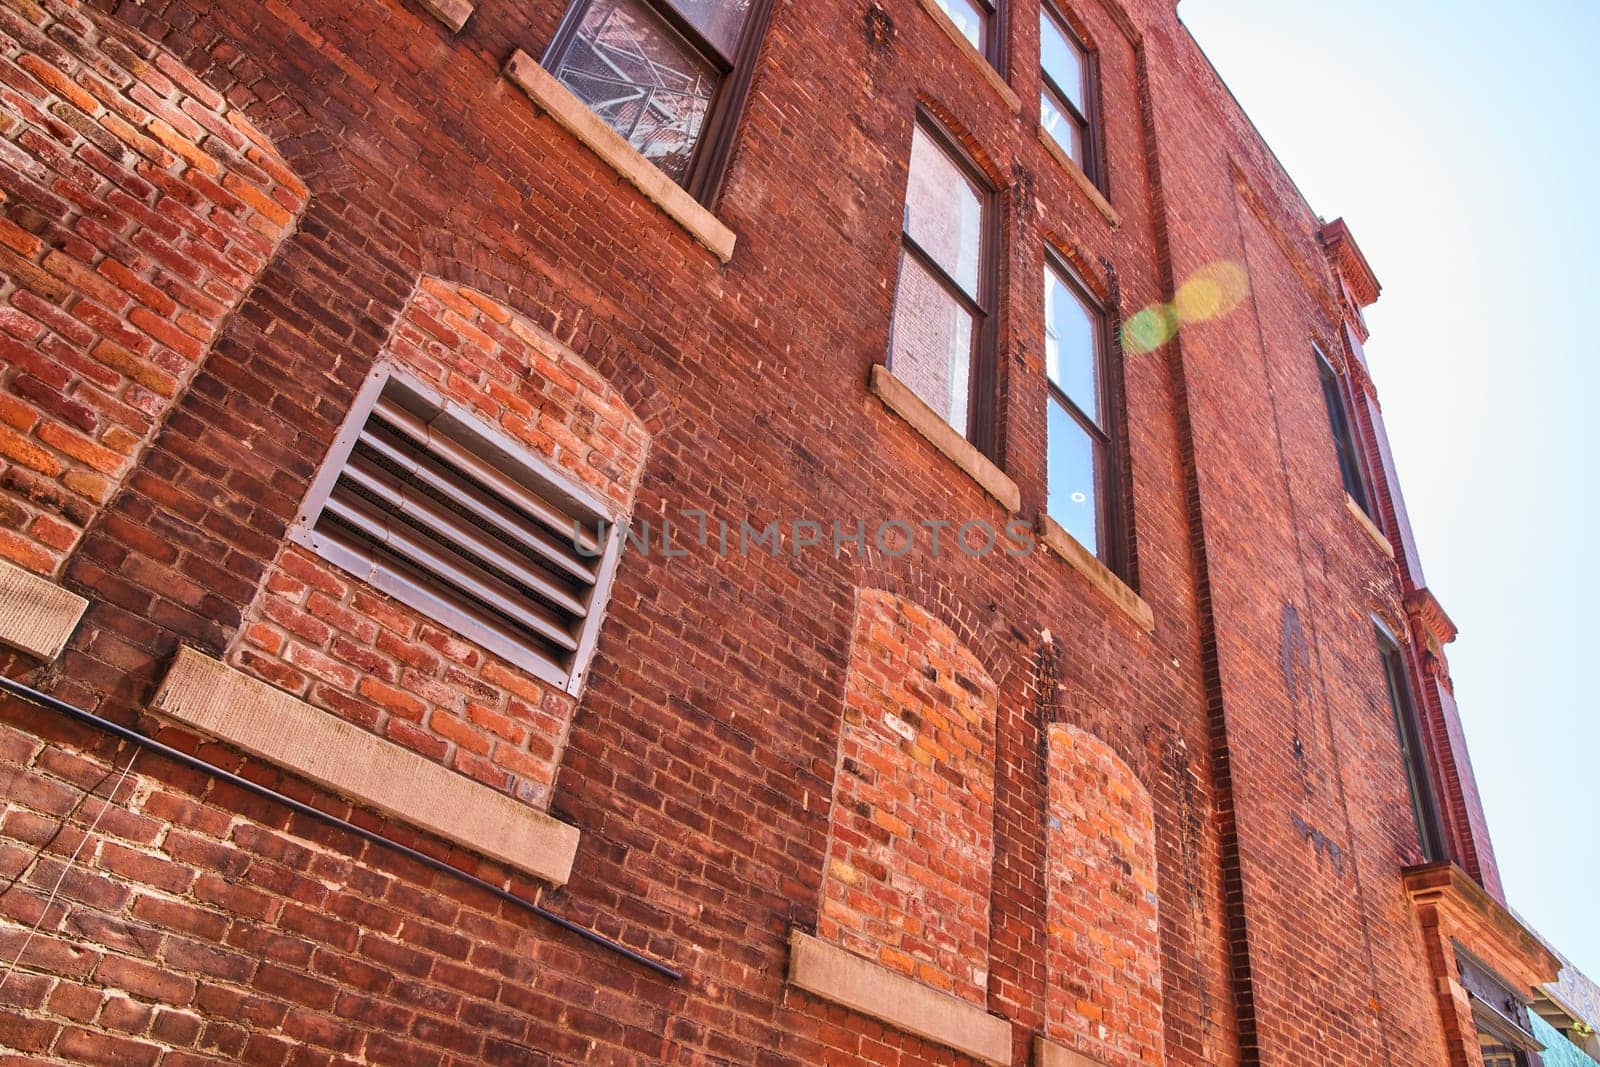 Sunlit vintage brick facade in downtown Fort Wayne, highlighting urban architecture and historical charm.